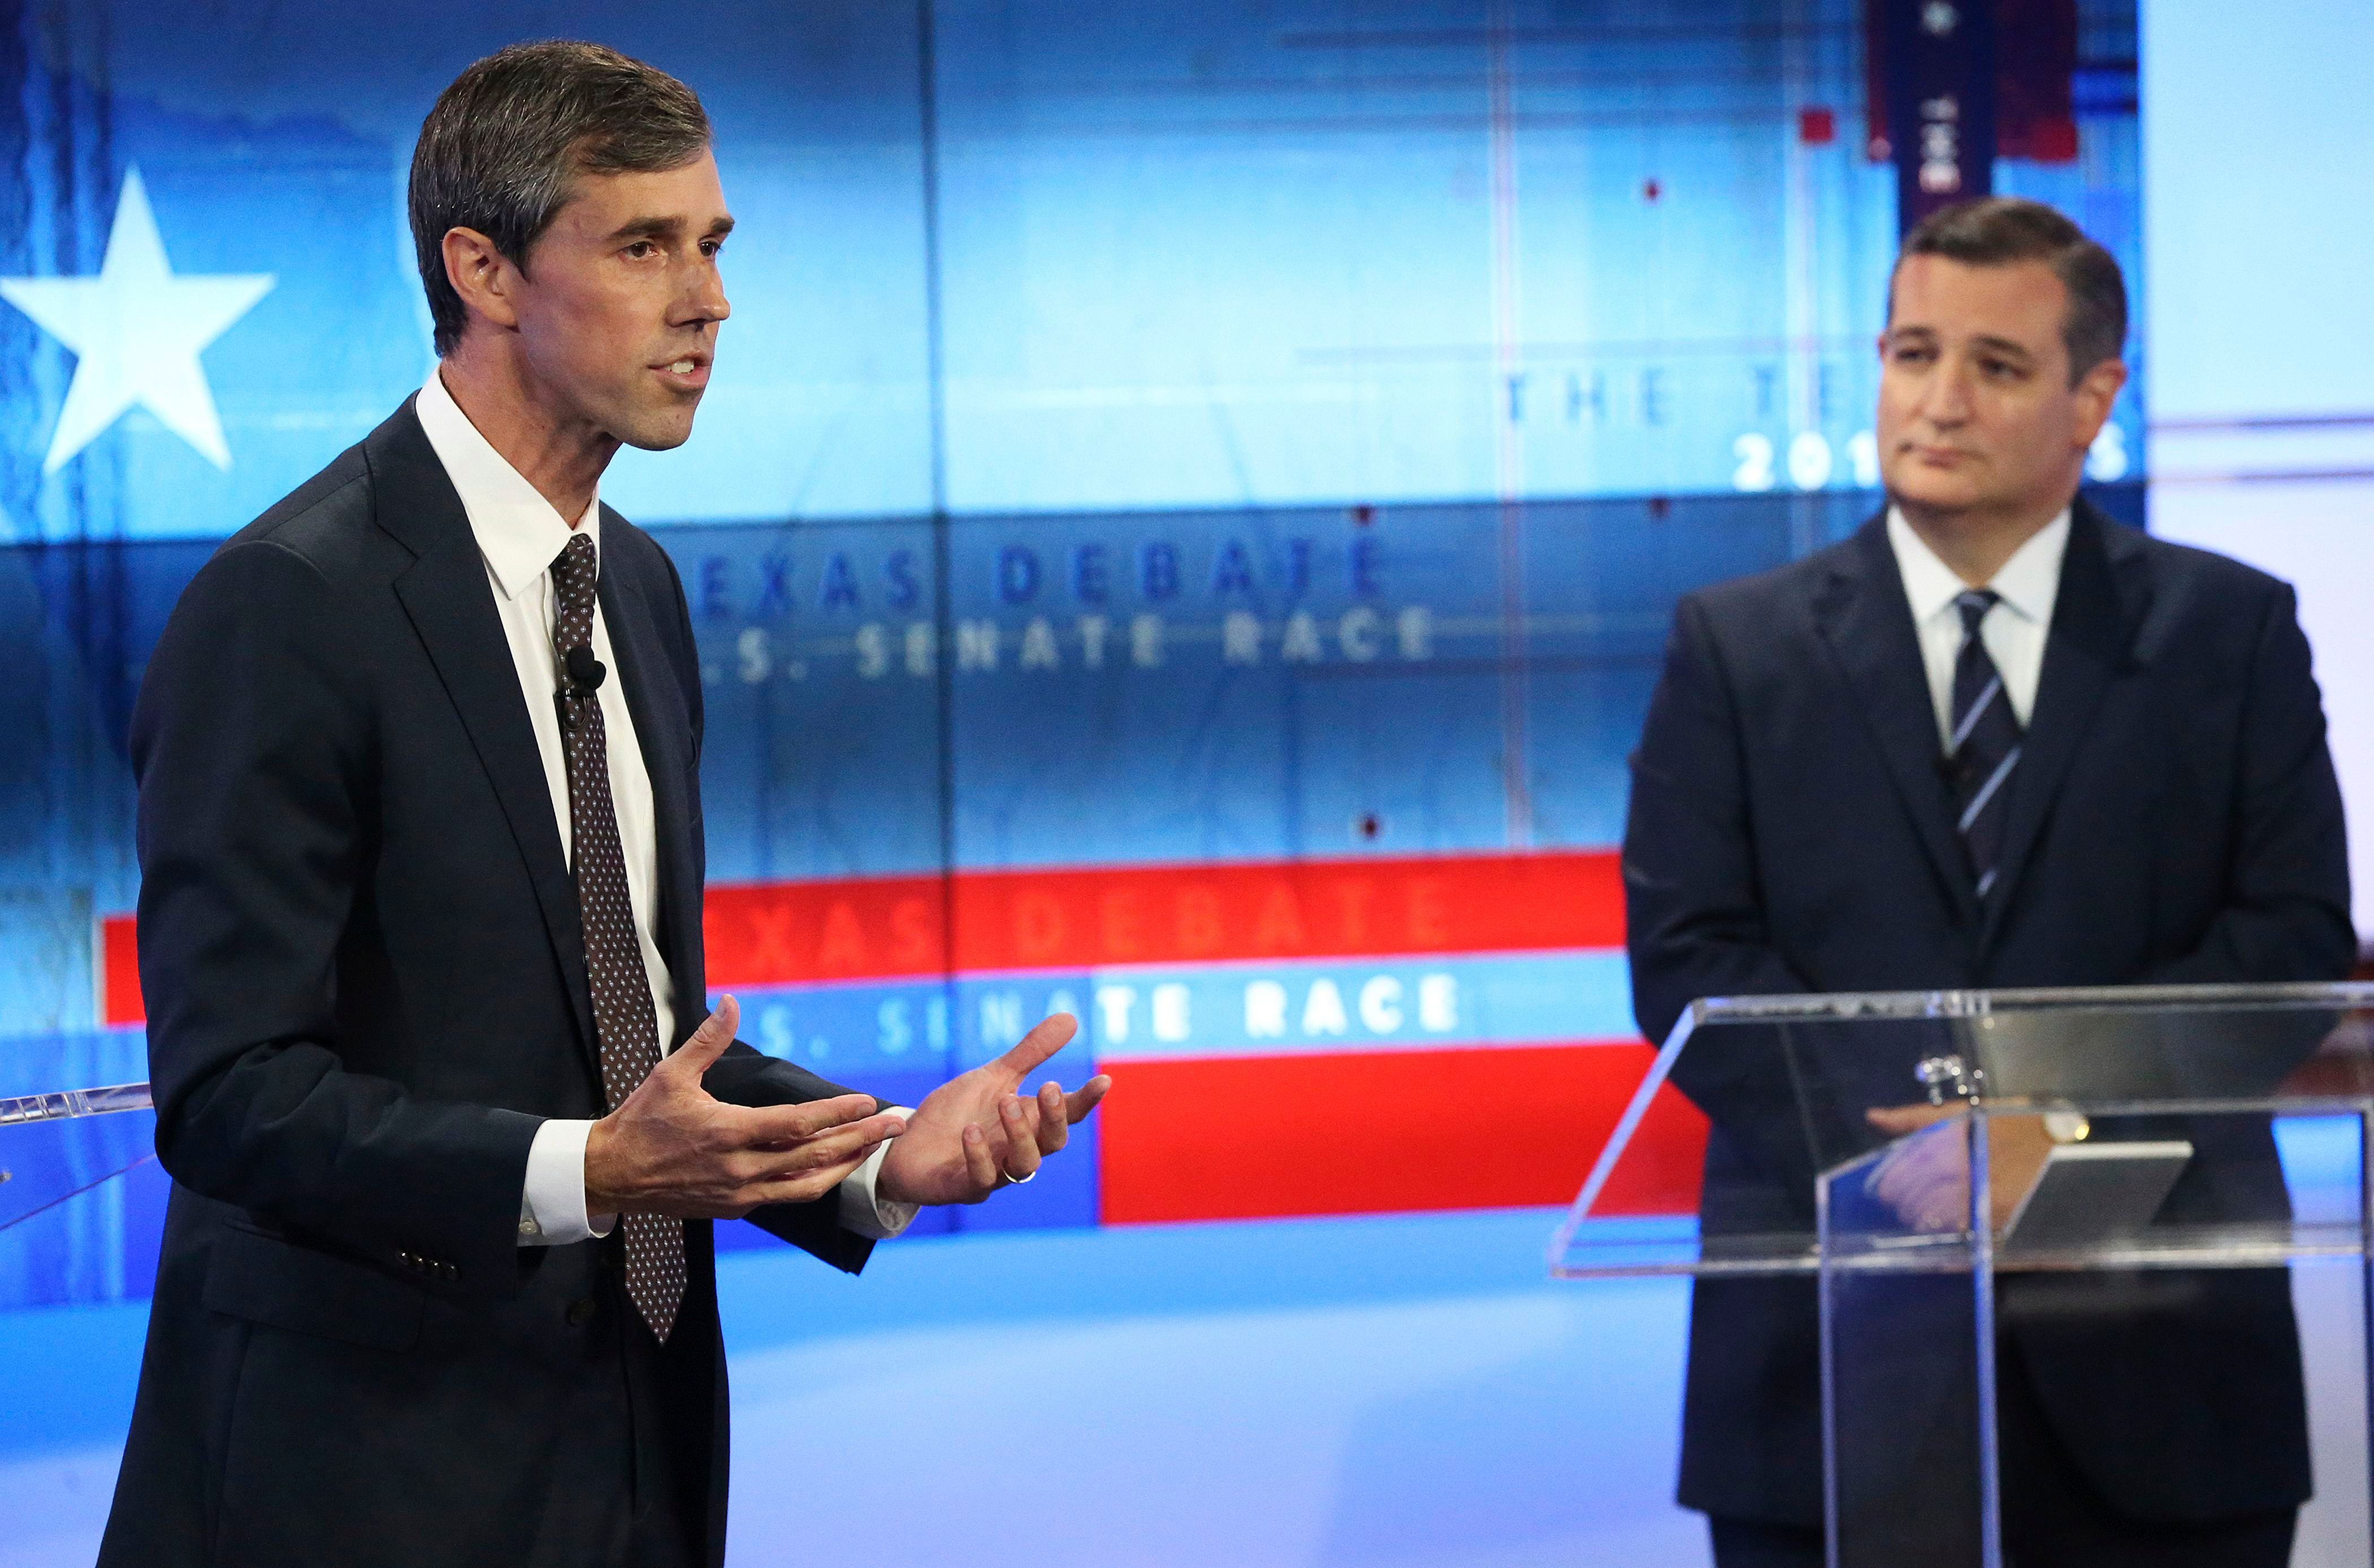 Republican Senator Ted Cruz of Texas (R) listens as Democratic challenger and US Representative from Texas Beto O'Rourke (L) gives his final remarks during a debate before the US Midterm elections in San Antonio, Texas, on Oct. 16, 2018. (TOM REEL—POOL/EPA-EFE/REX/Shutterstock)